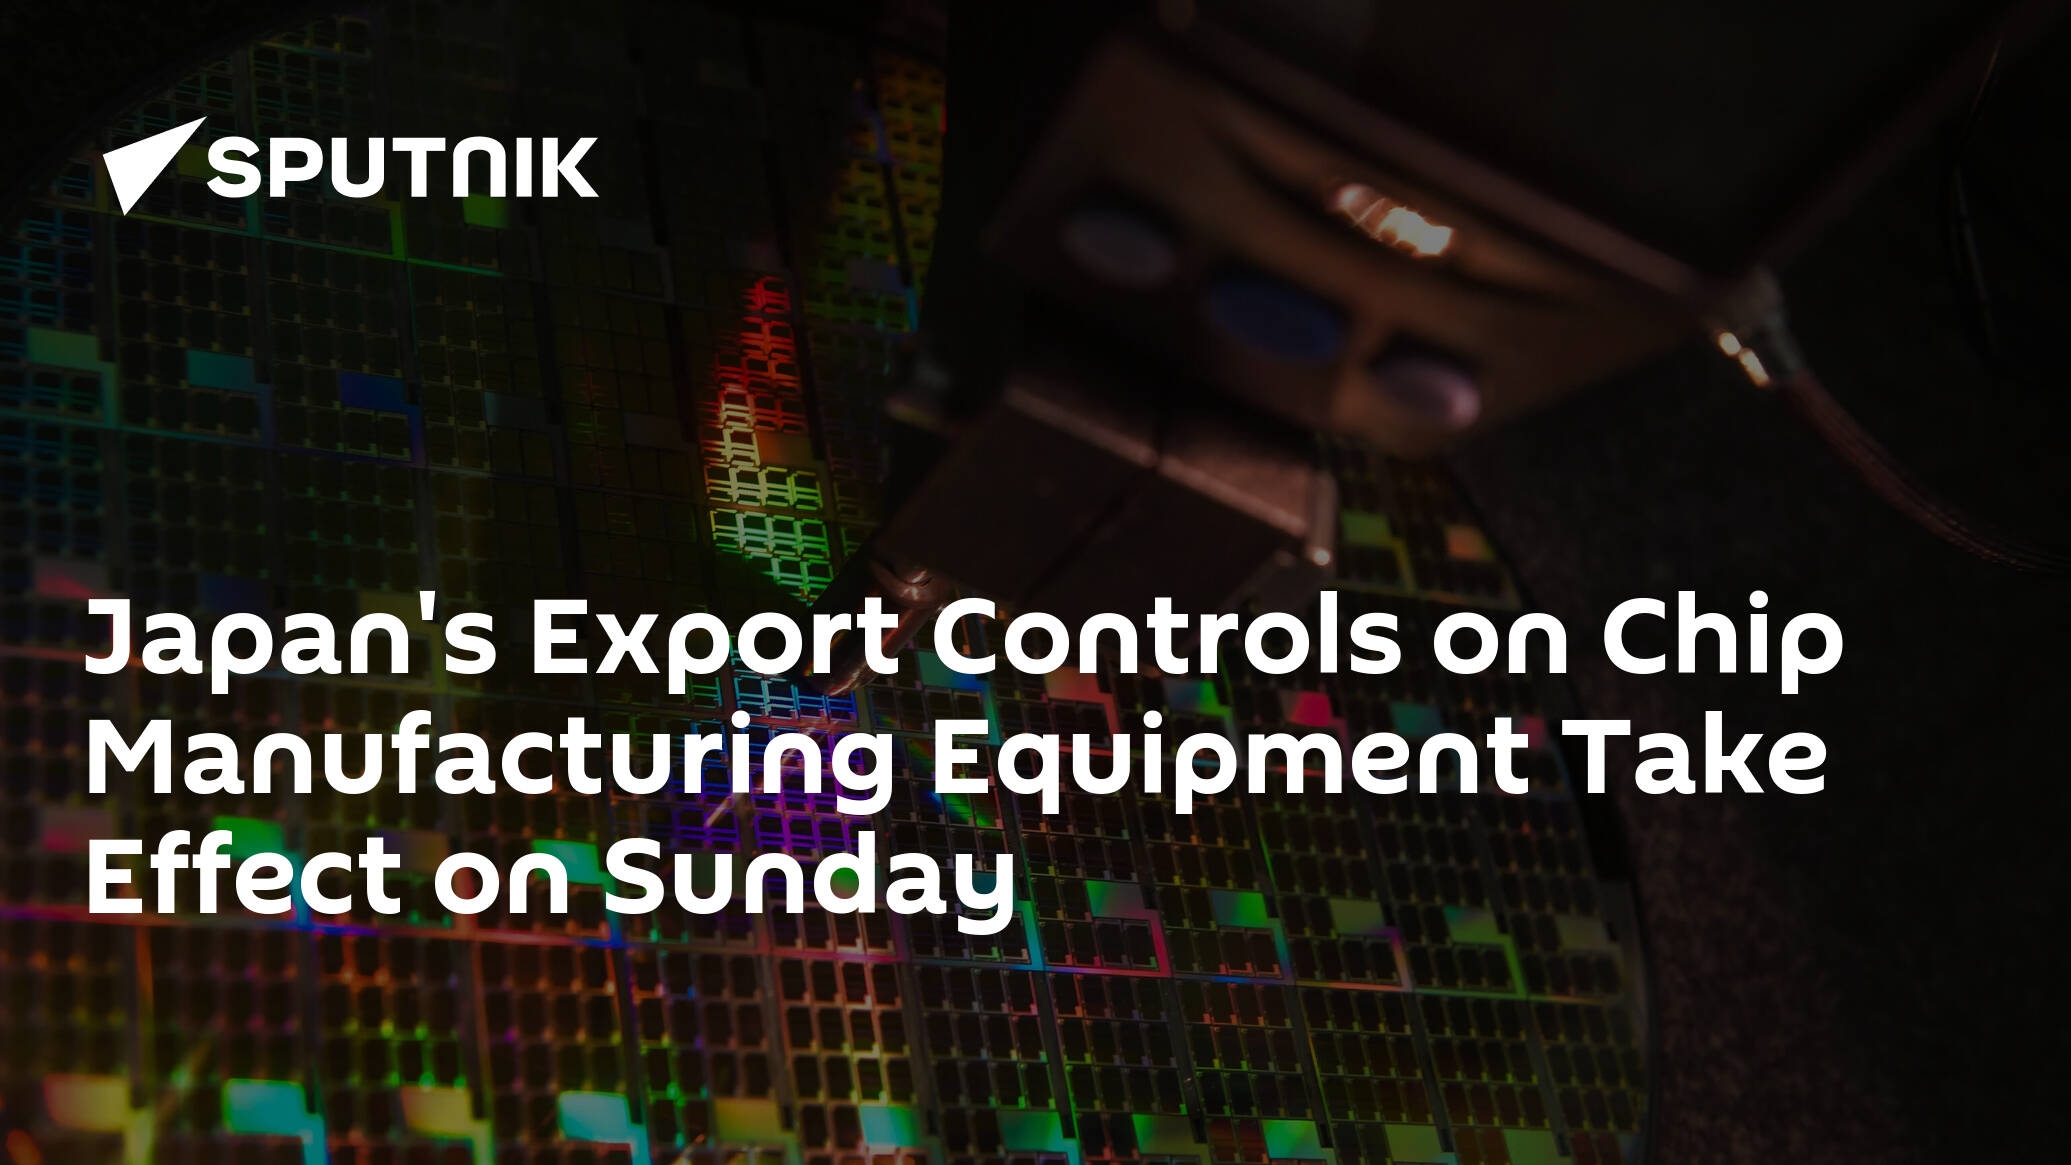 Japan's Export Controls on Chip Manufacturing Equipment Take Effect on Sunday